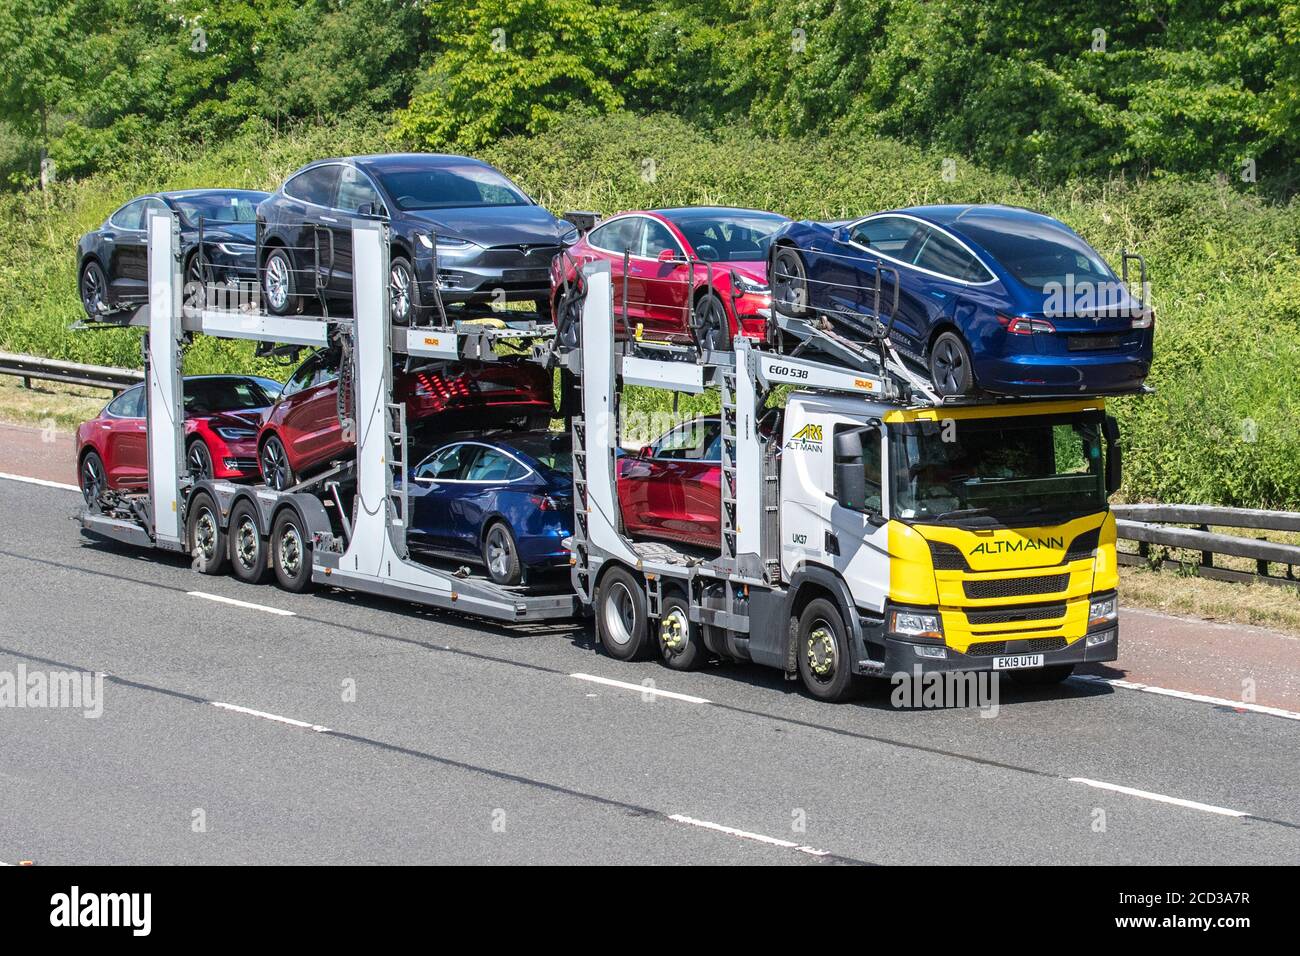 ARS Altman Auto transporter, Tesla american car transporter carrier; Motorway heavy bulk Haulage delivery trucks, haulage, lorry, transportation, collection and deliveries, multi-car commercial vehicle carrier, truck, special cargo, vehicle delivery, transport, industry, freight on the M6 motorway. Stock Photo